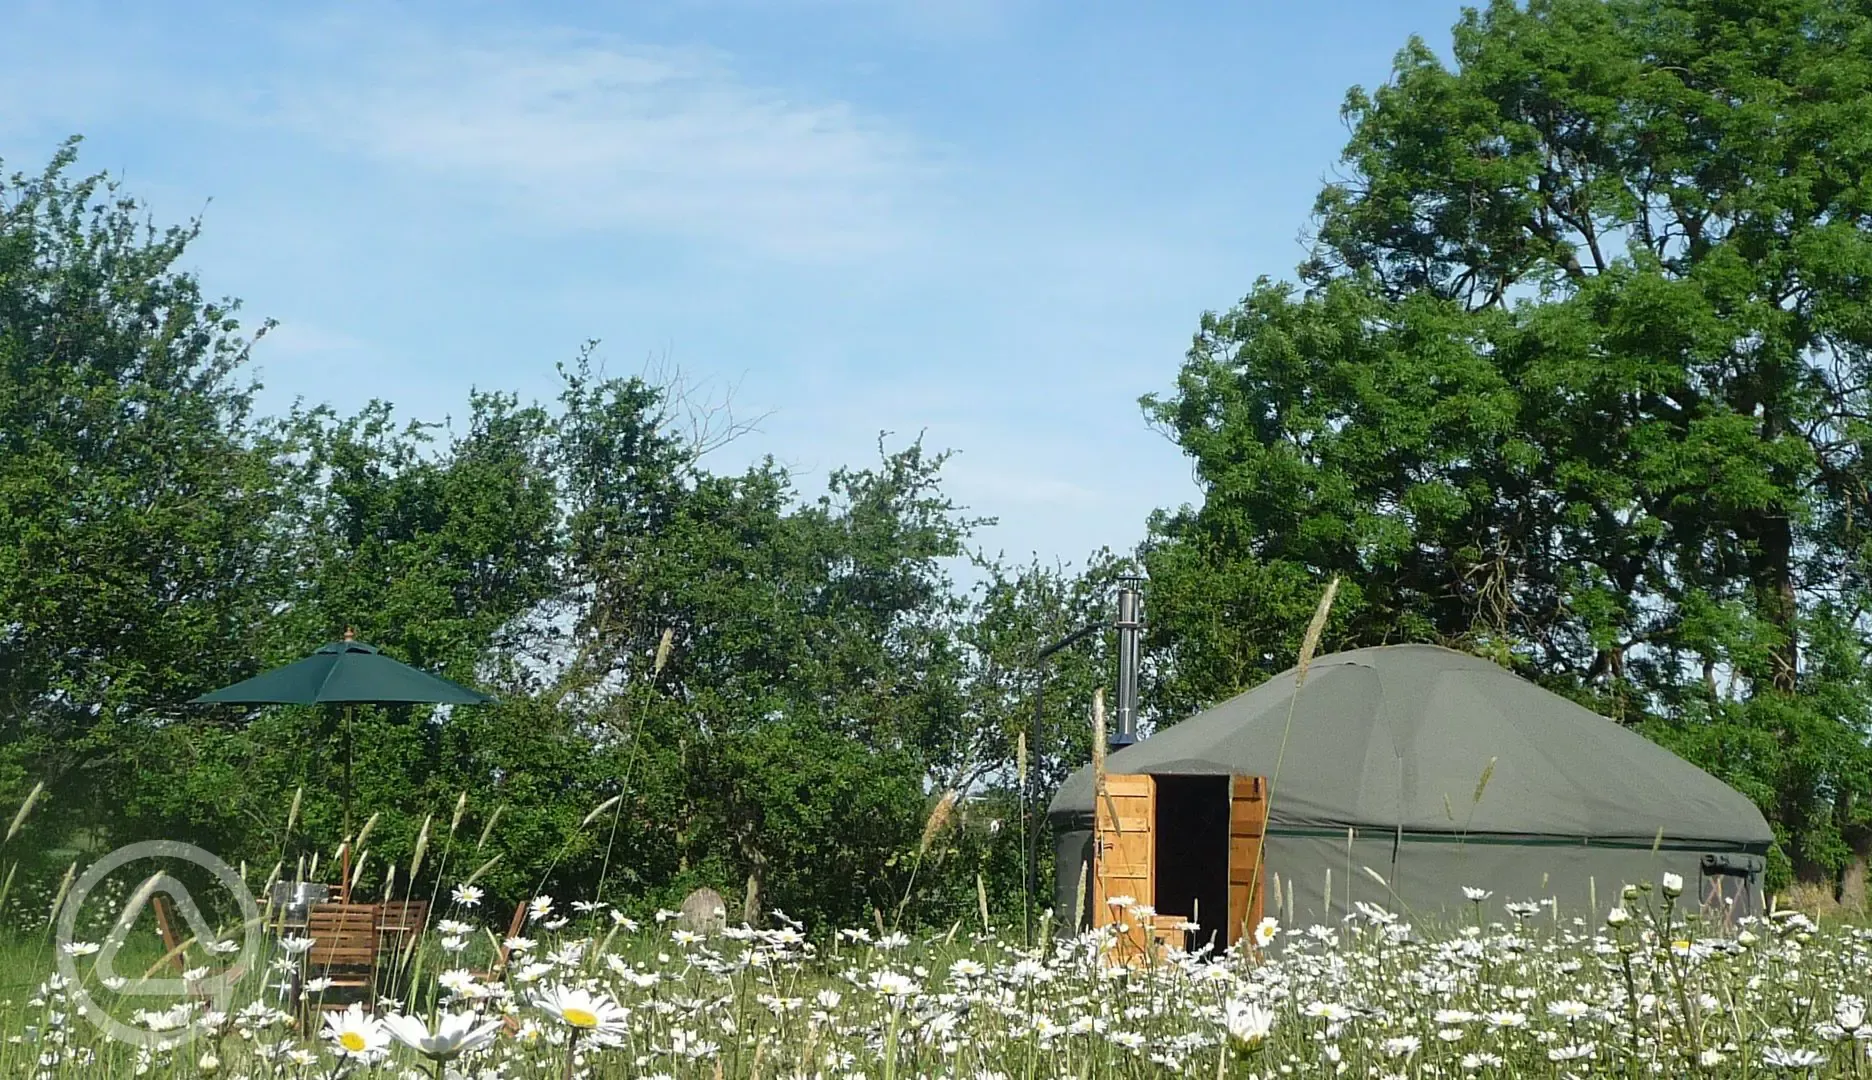 Yurts in the meadow